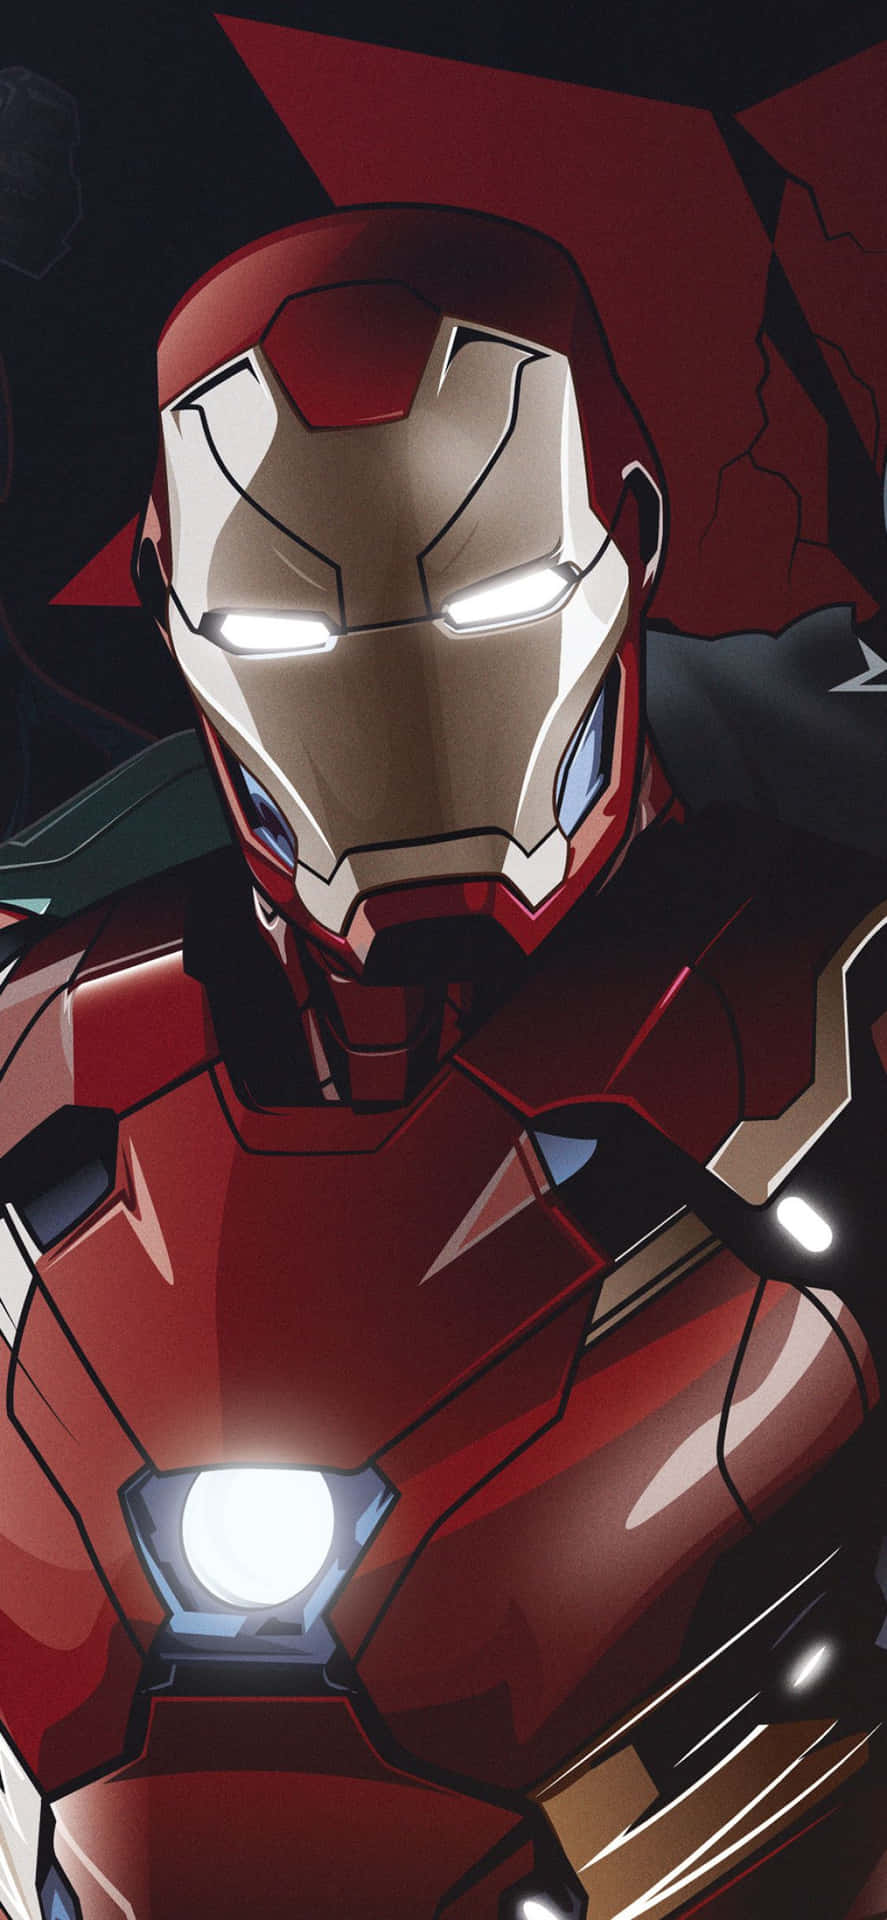 Get Tony Stark's suit with the Iron Man Iphone X. Wallpaper